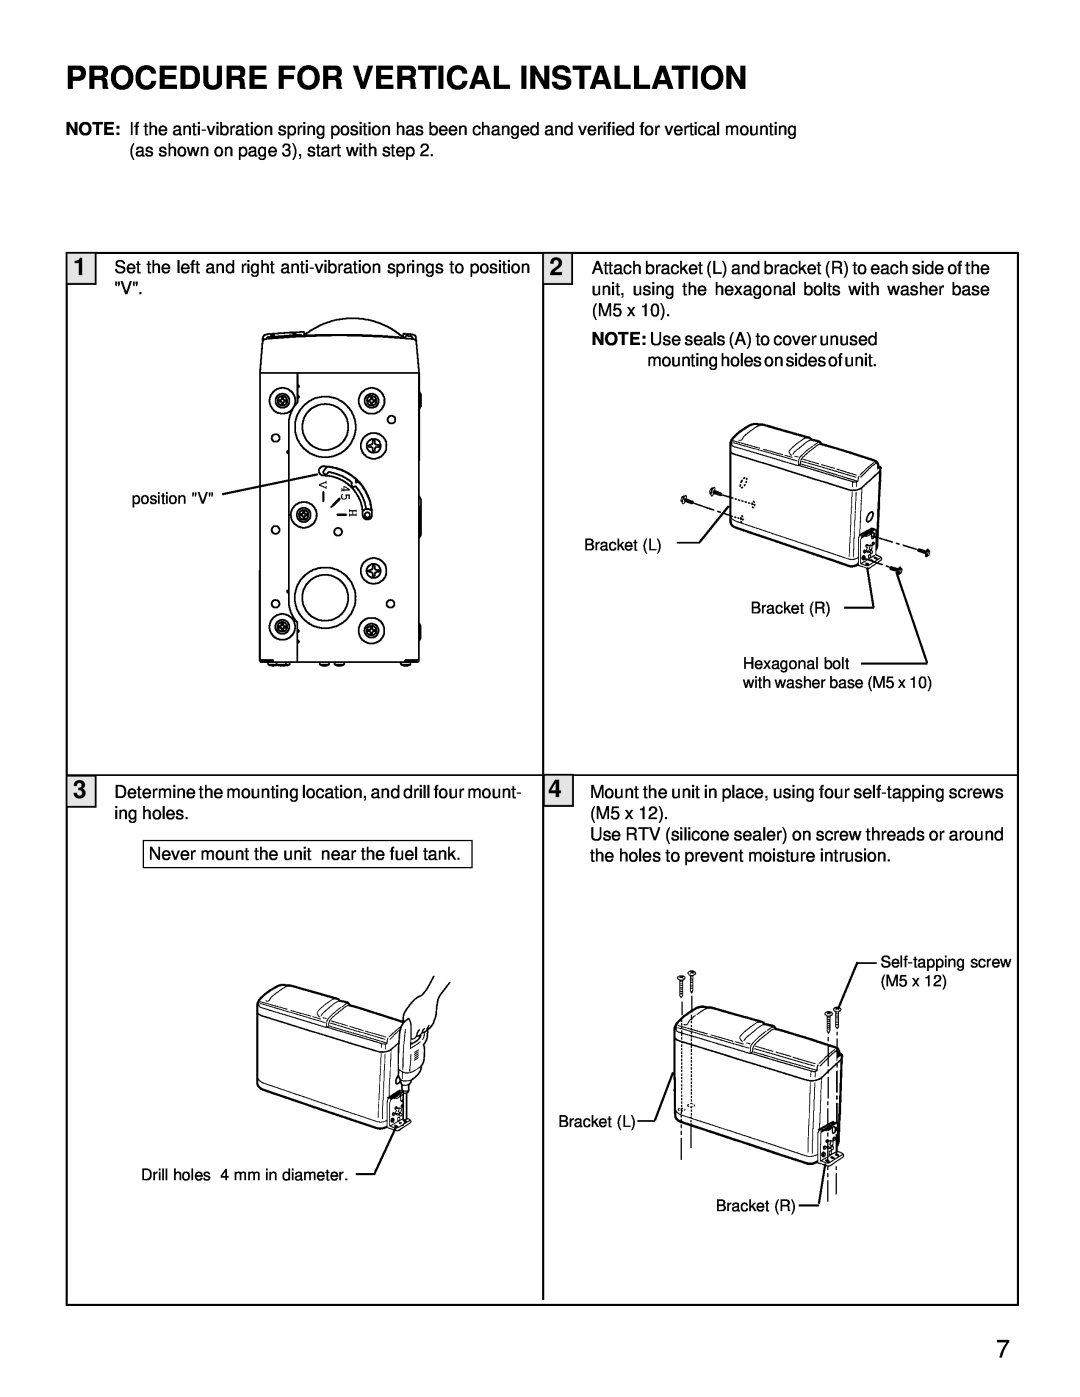 Audiovox ACC-52 owner manual Procedure For Vertical Installation 